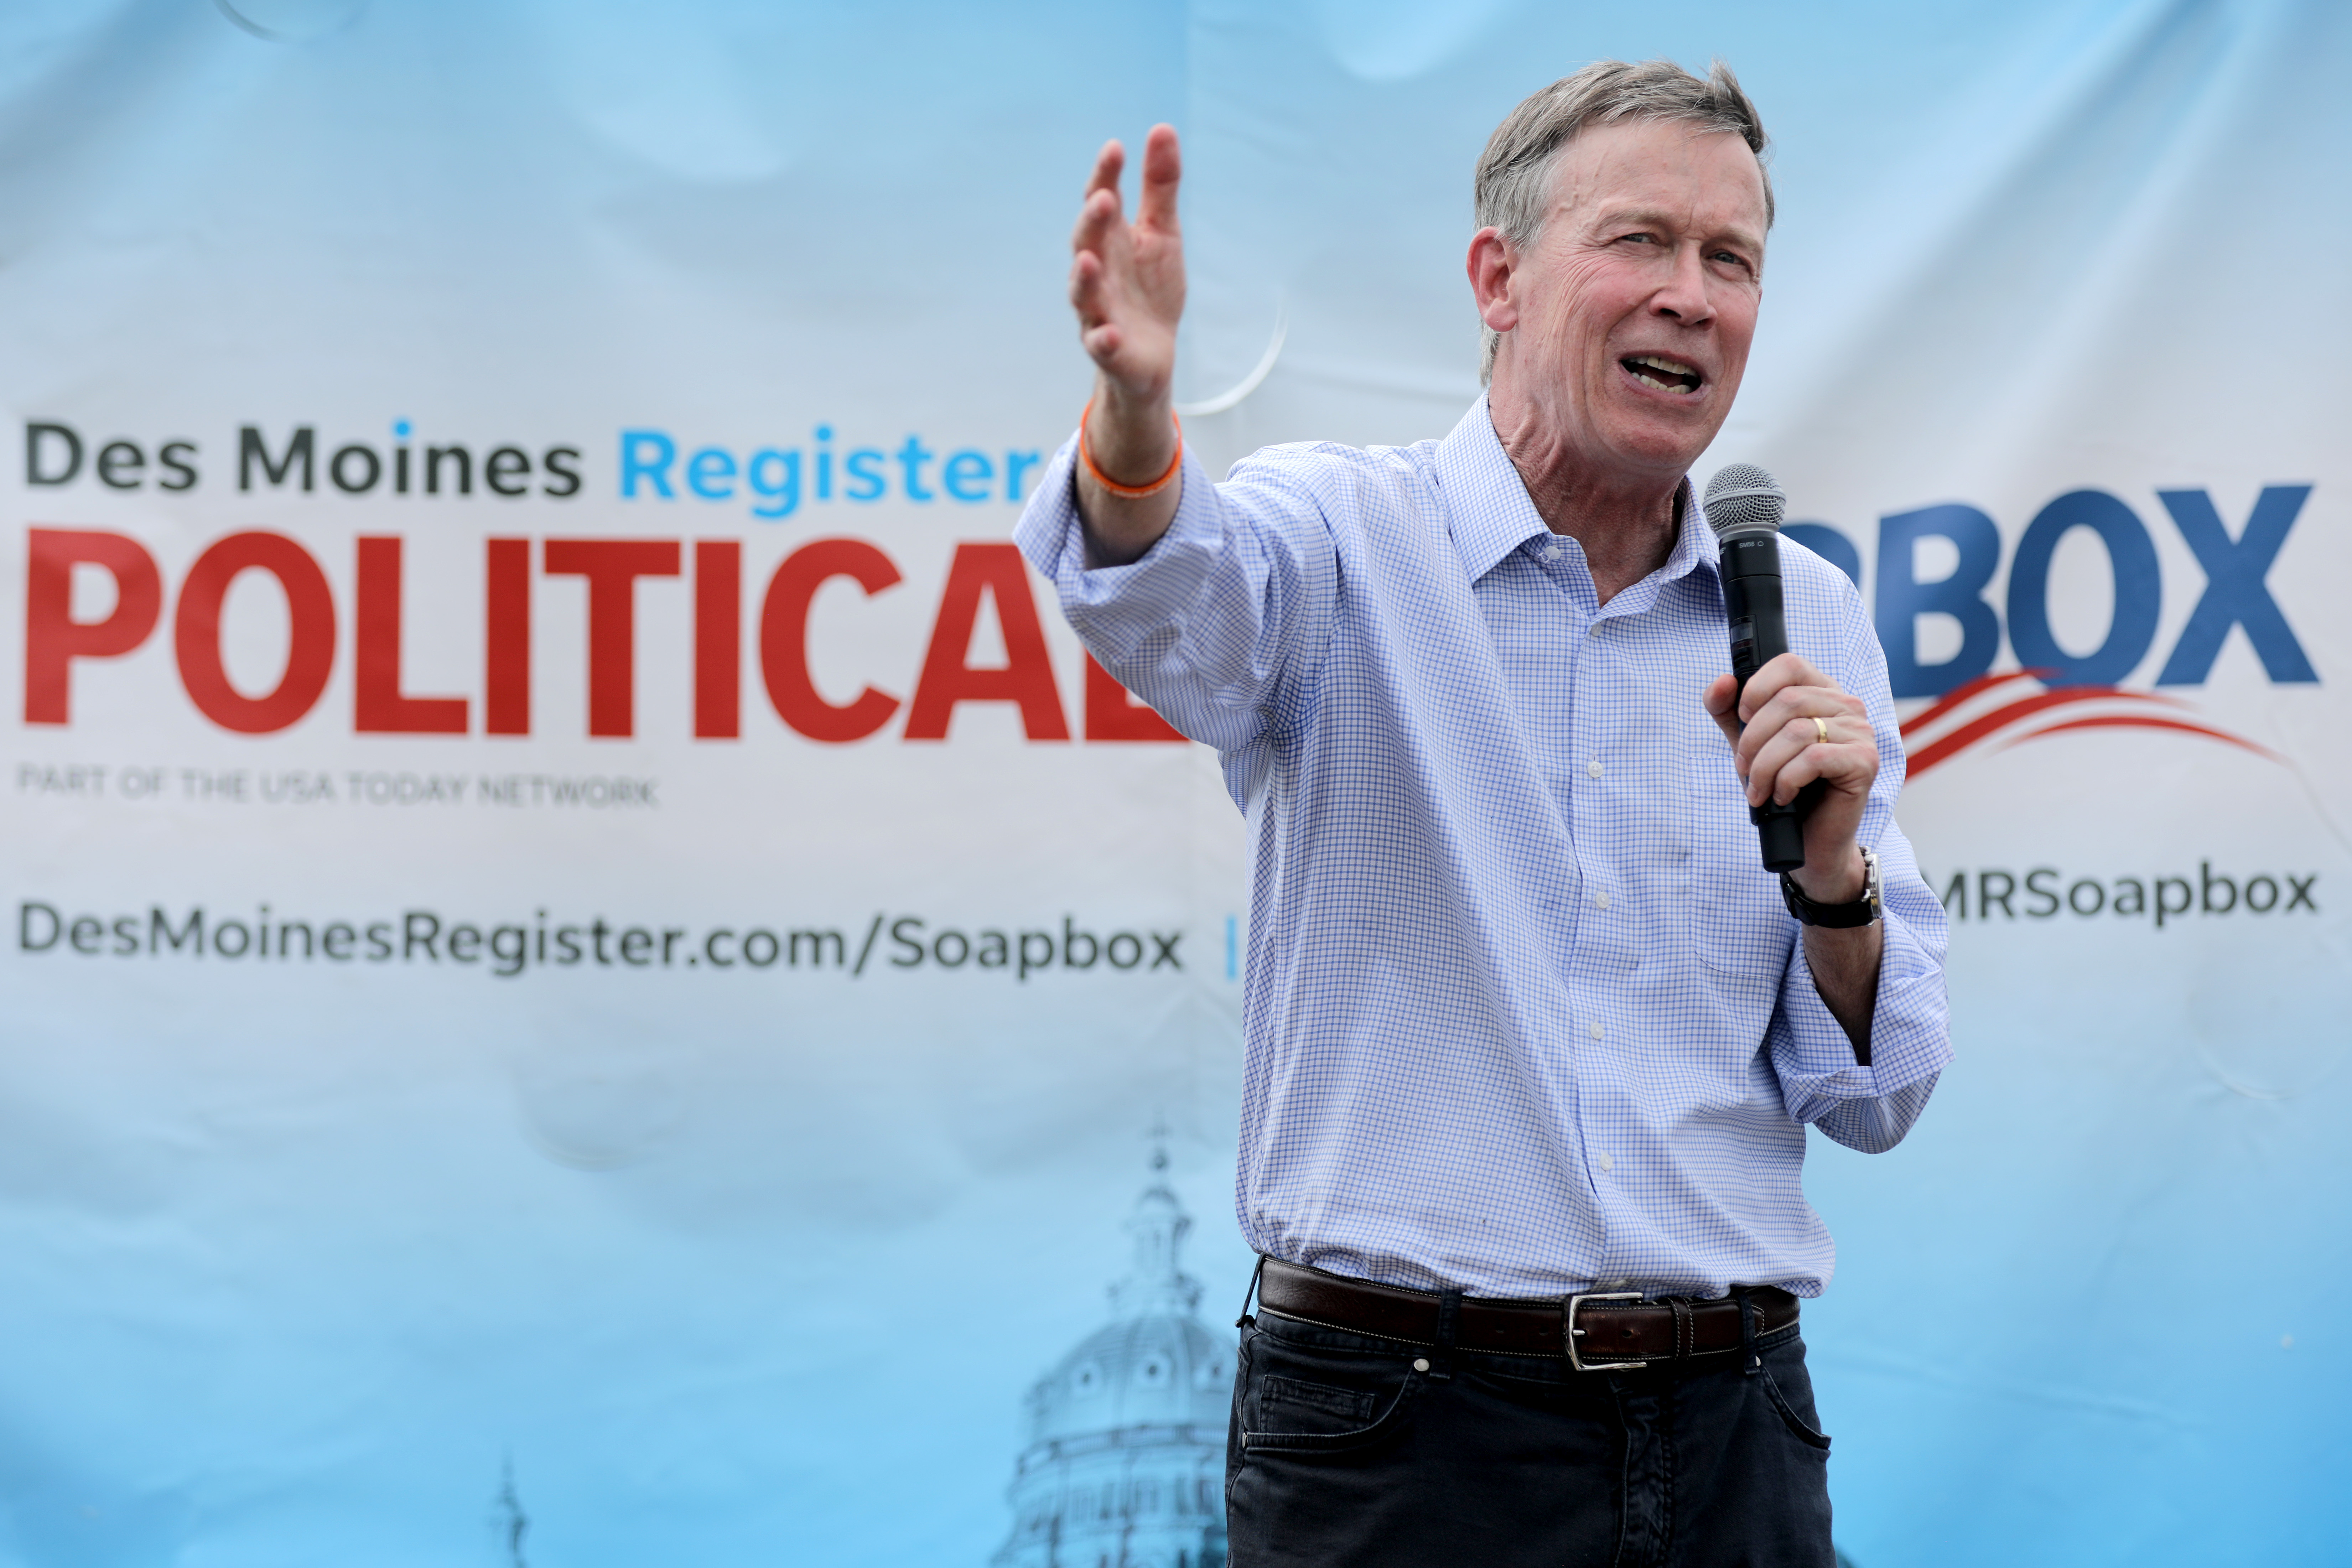 DES MOINES, IOWA - AUGUST 10: Democratic presidential candidate and former Colorado Governor John Hickenlooper delivers a 20-minute campaign speech at the Des Moines Register Political Soapbox at the Iowa State Fair August 10, 2019 in Des Moines, Iowa. Twenty-two of the 23 politicians seeking the Democratic Party presidential nomination will be visiting the fair this week, six months ahead of the all-important Iowa caucuses. (Photo by Chip Somodevilla/Getty Images)